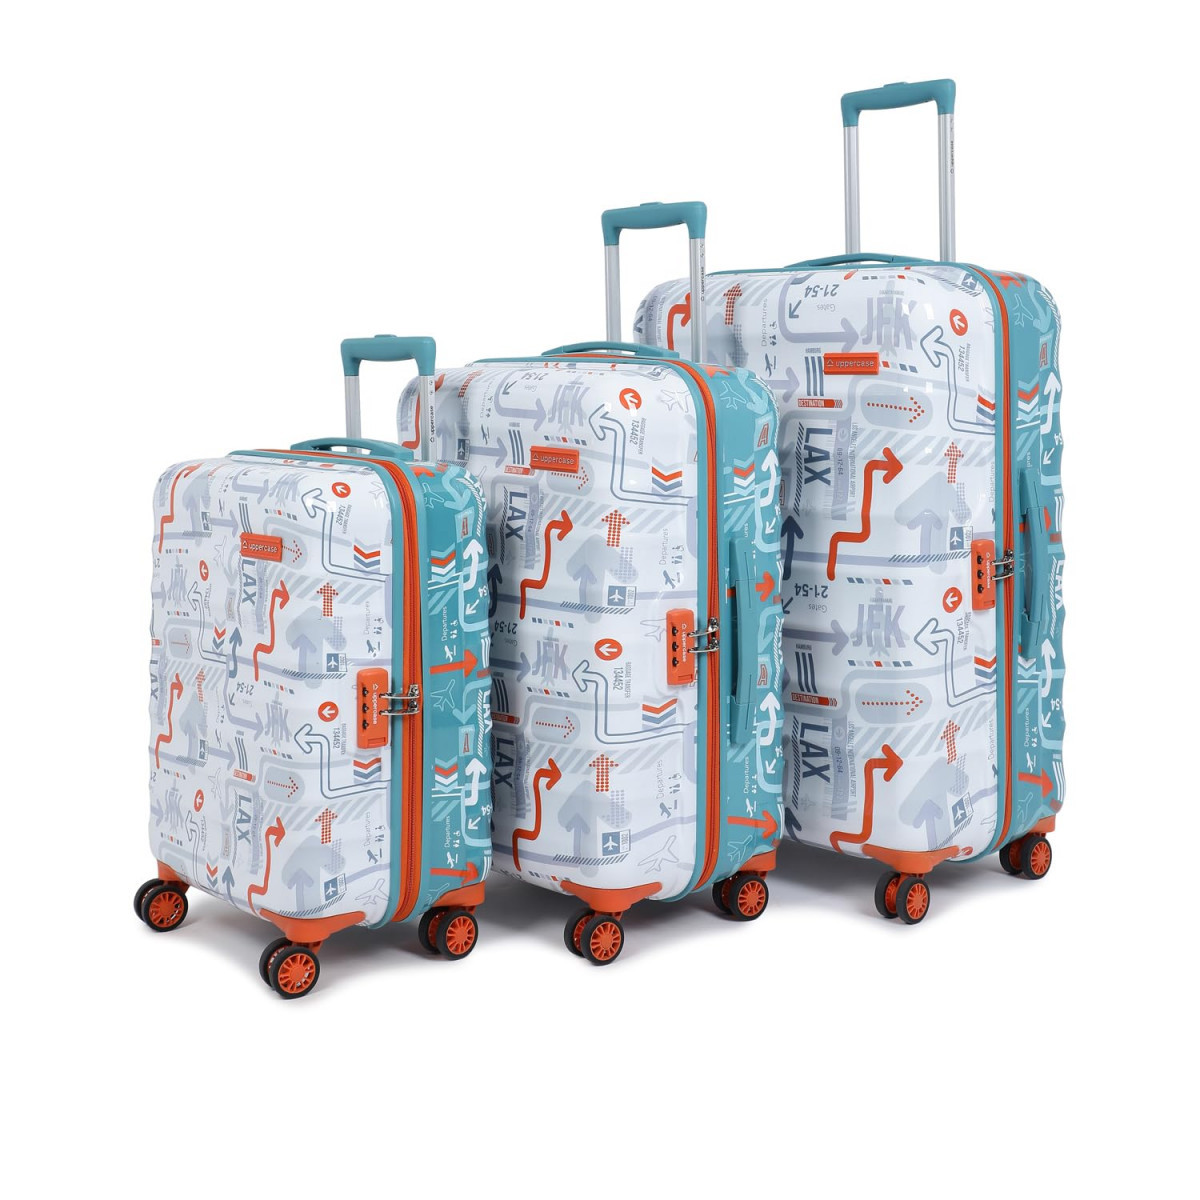 uppercase Jfk Duo Trolley Bag Set Of 3 SML Hardsided Cabin  Check-In Luggage Combination Lock 8 Wheel 2000 Days Warranty Dual Tone White  Teal Blue 31 X 53 X 755 Cm Polyester Spinner